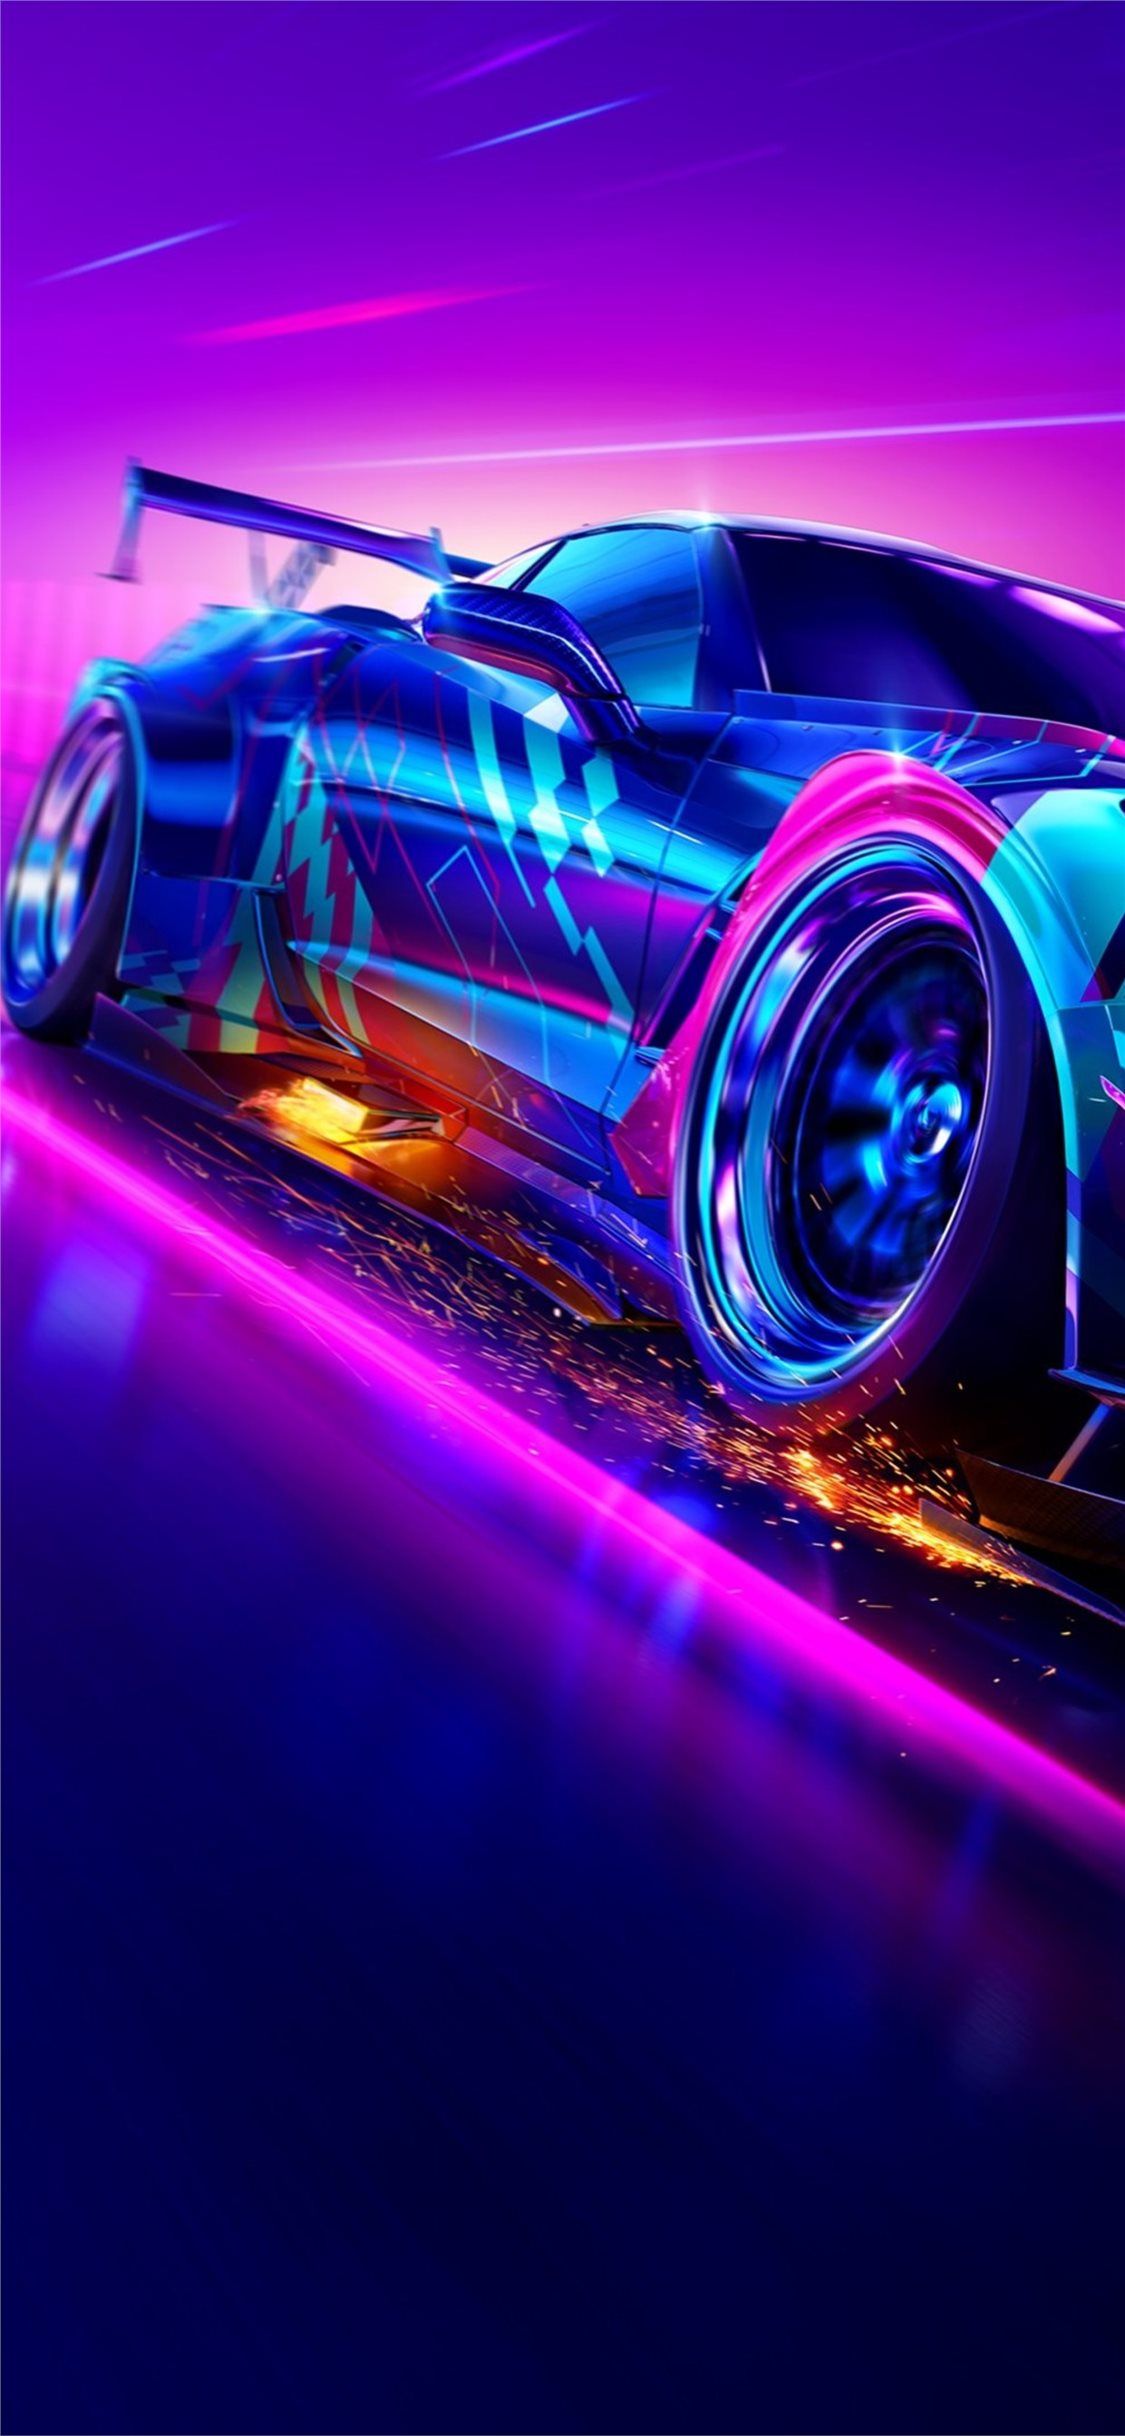 need for speed heat 2019 4k iPhone X Wallpaper. Carros, Carros